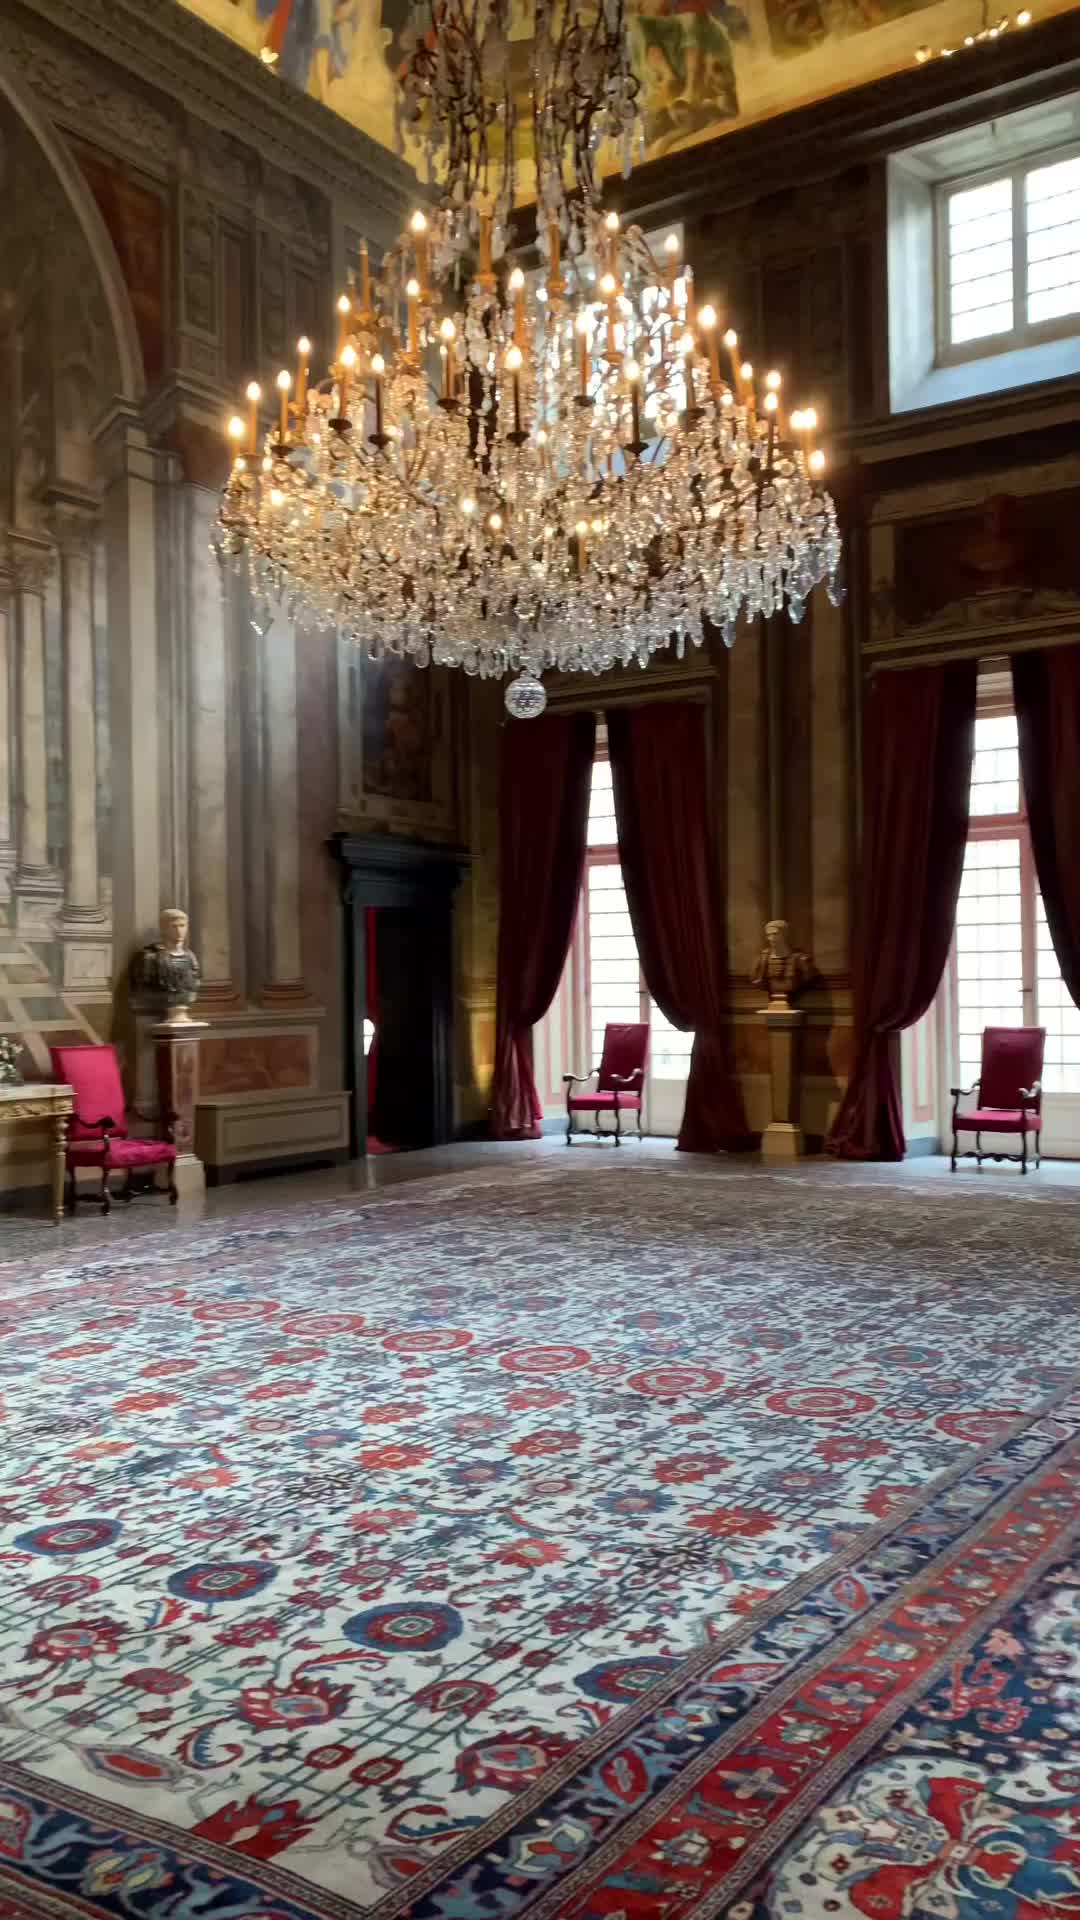 Discover the Majestic Art of Genoa’s Spinola Palace